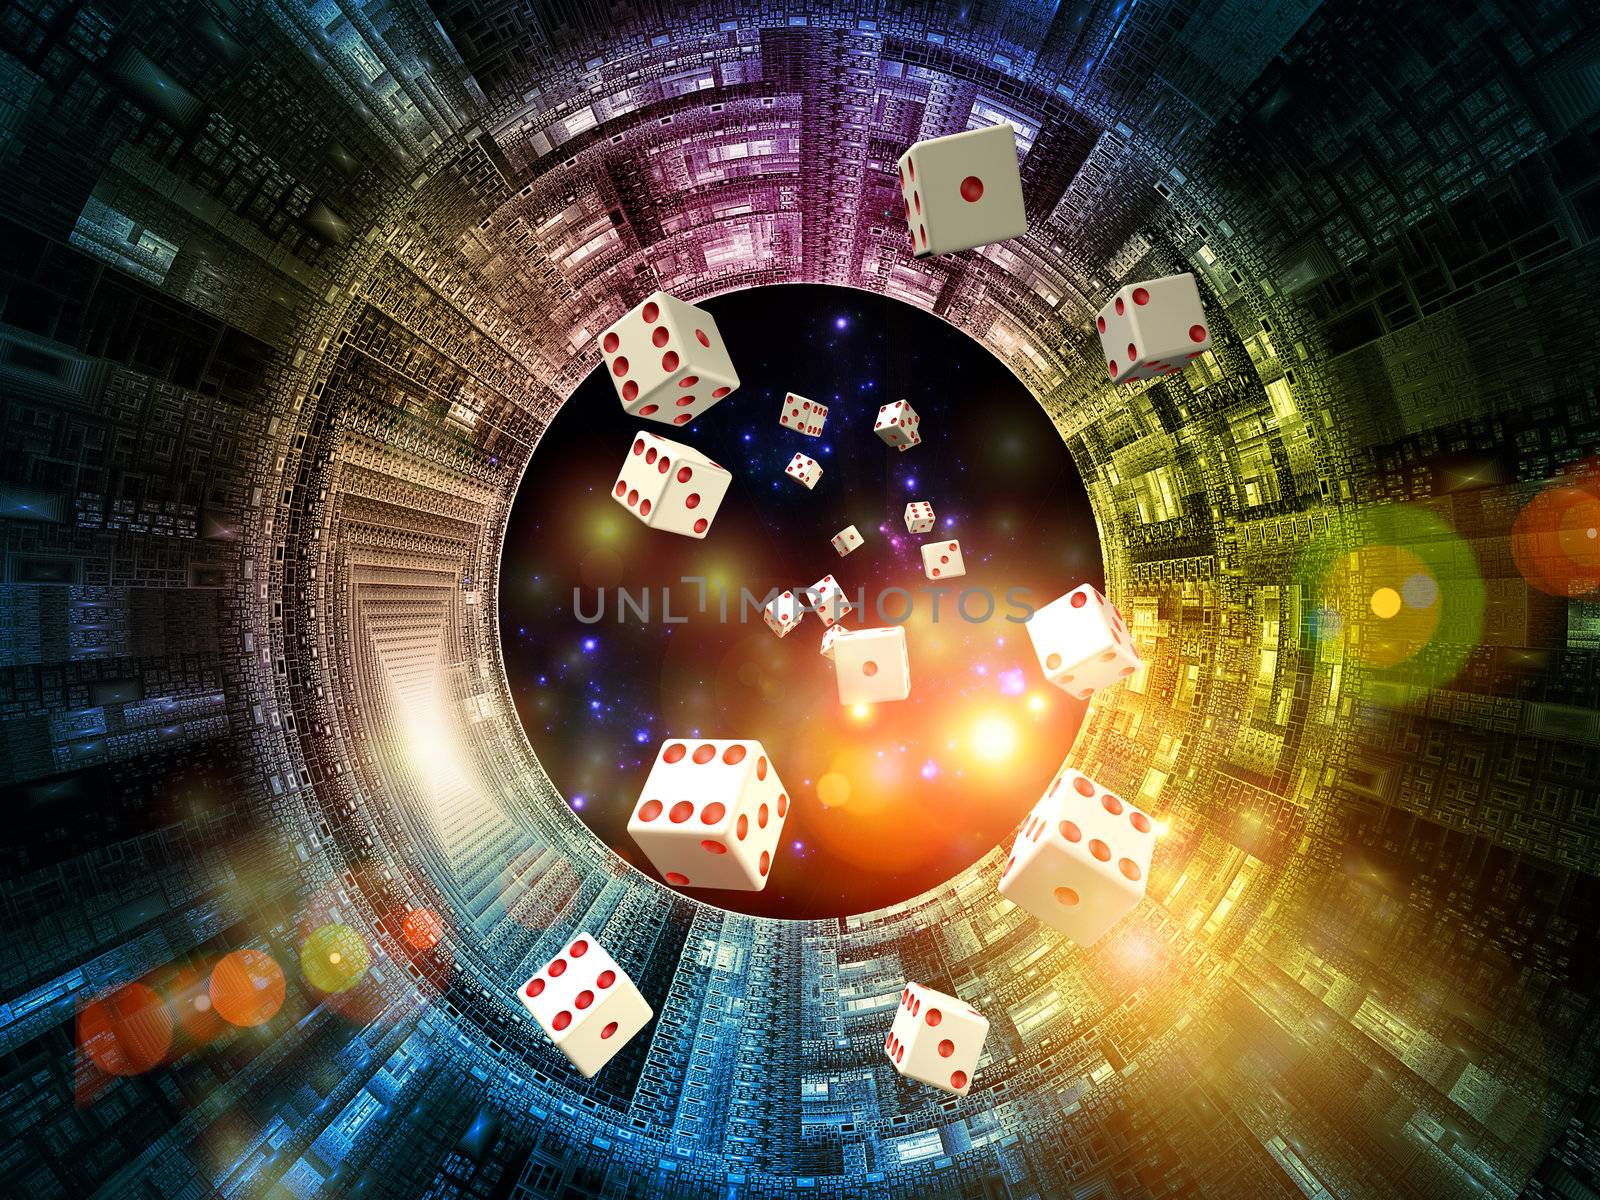 Interplay of dice and technological background on the subject of chance, luck, risk, mathematics and computation in modern business and technology